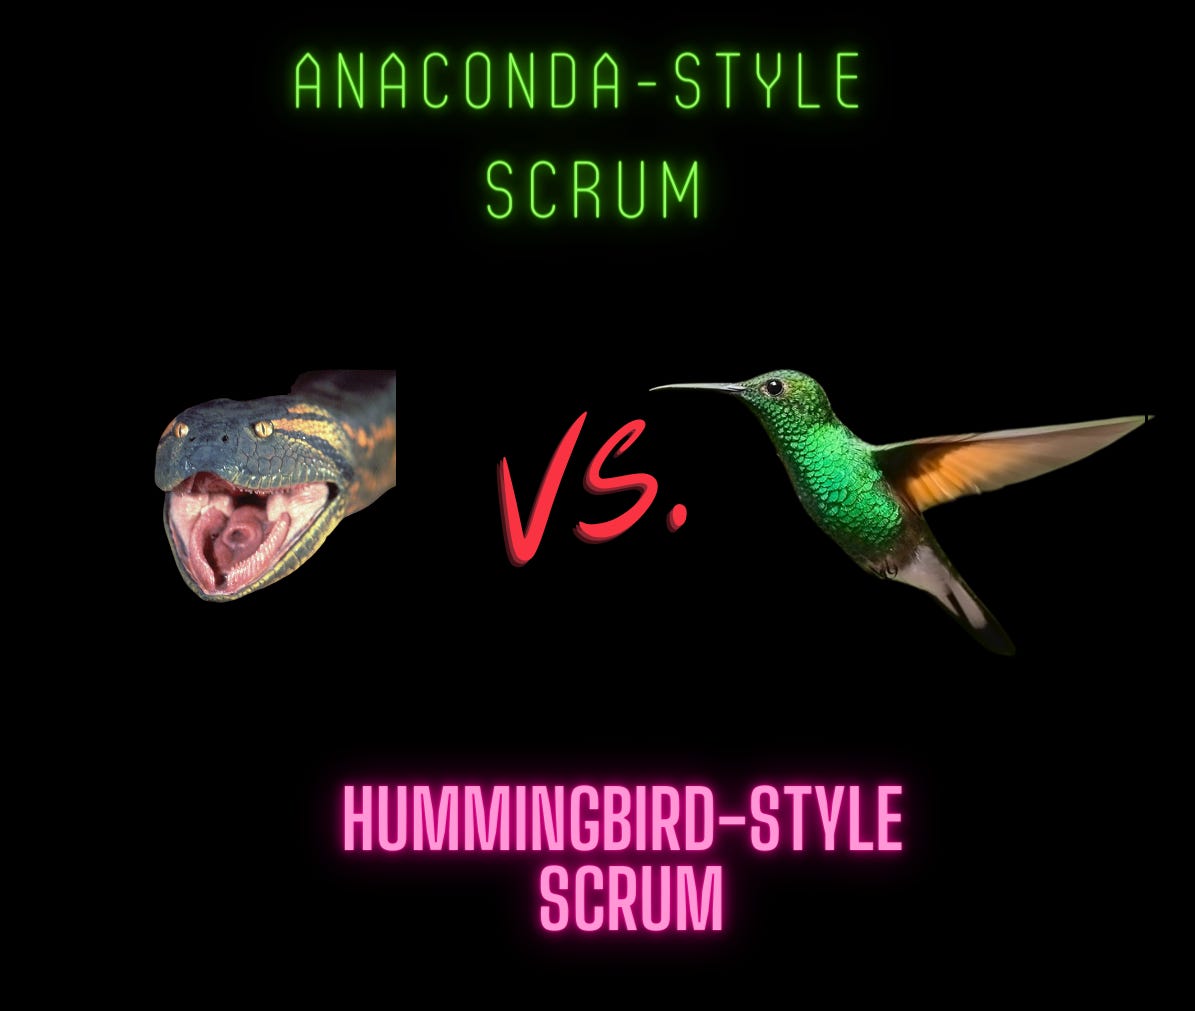 Are you practicing Anaconda or Hummingbird-style Scrum?